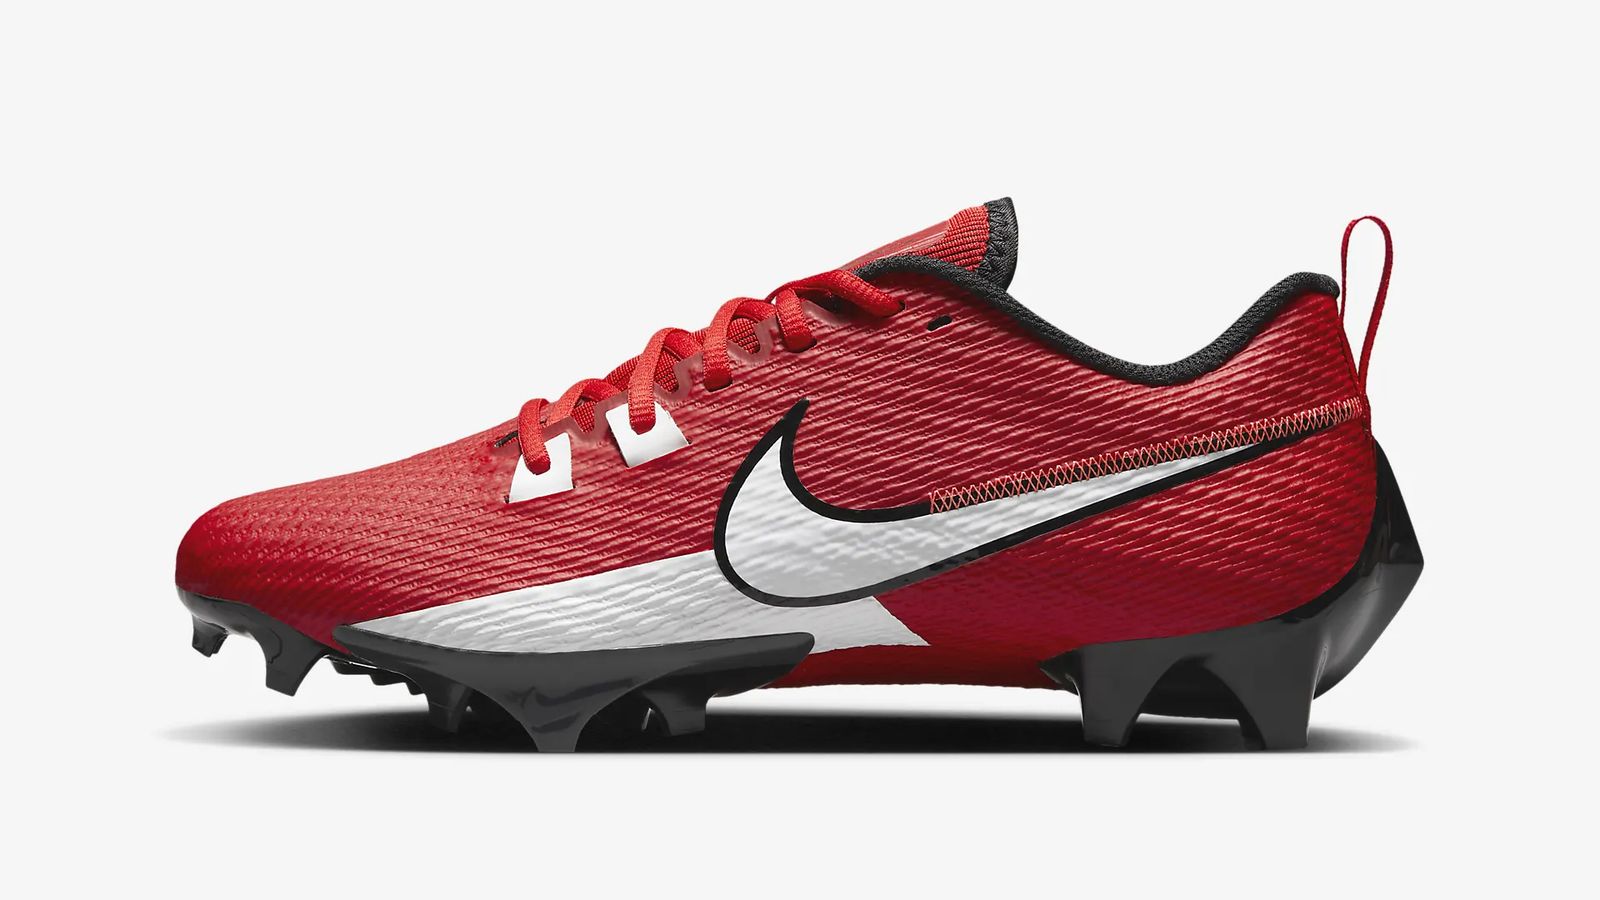 Nike Vapor Edge Speed 360 2 product image of a red cleat featuring a white Swoosh outlined in black down the side to match the cleats underneath.